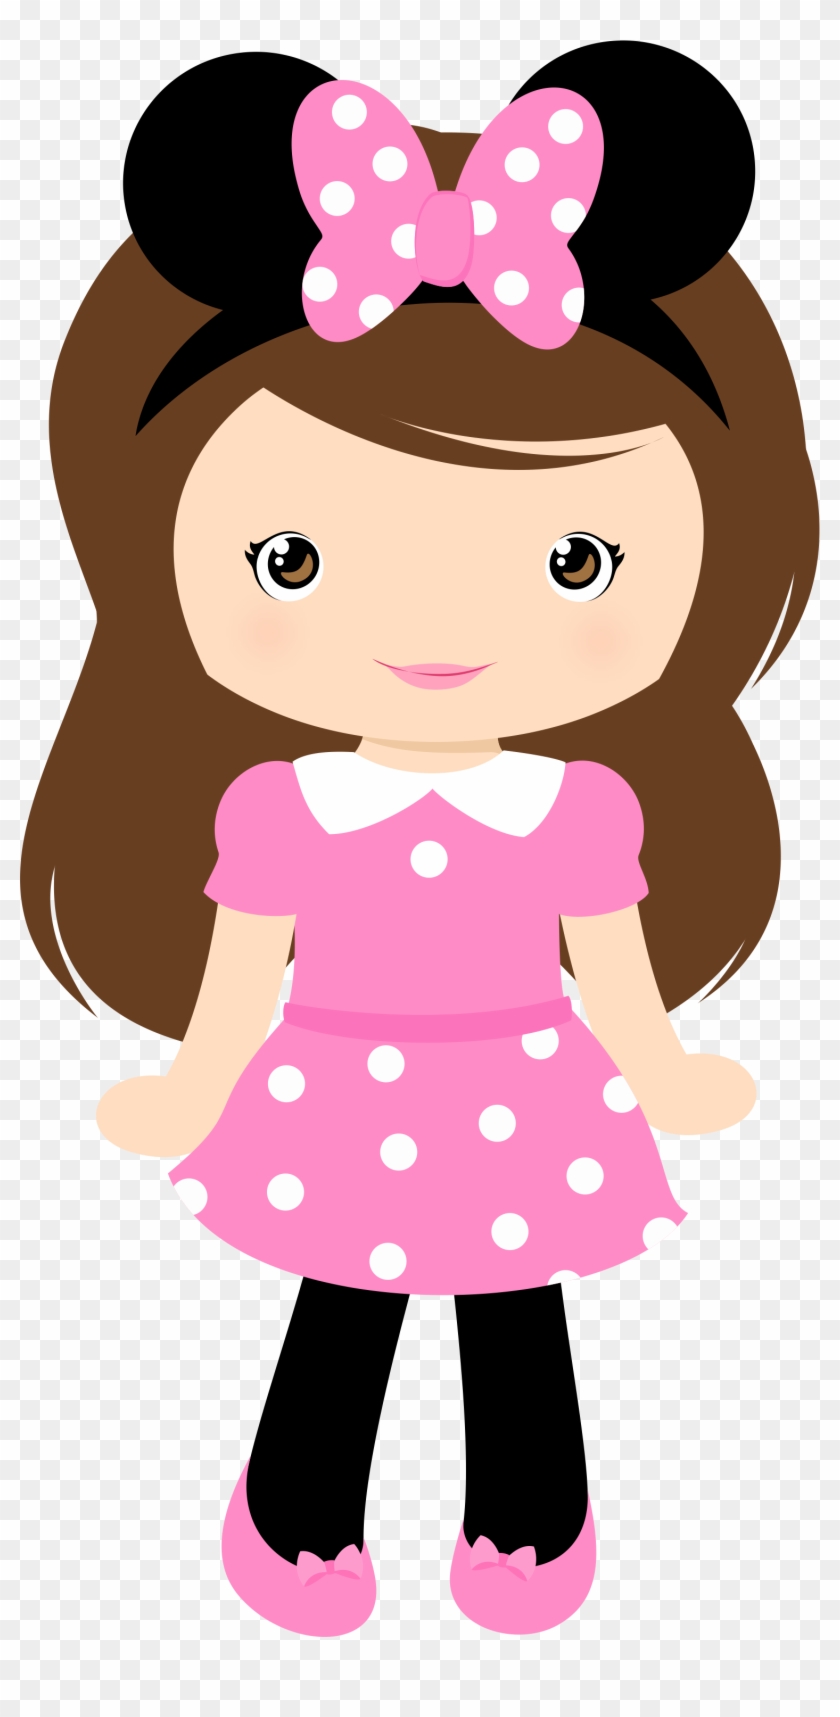 Pinterest Clipart Cute Girl - Happy Birthday My Sweet Daughter Cake - Png Download #467516